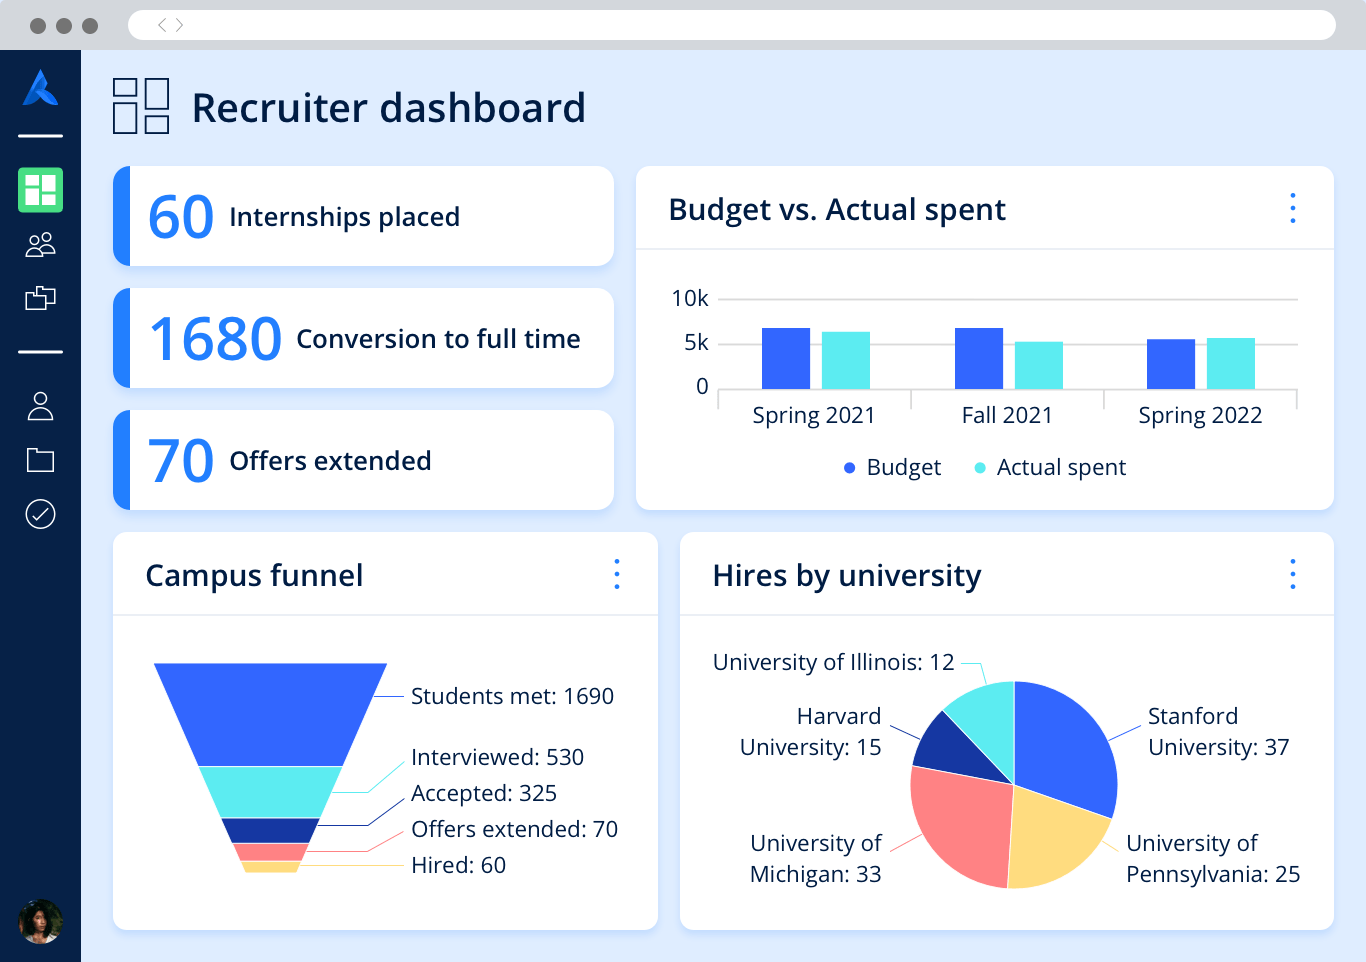 A recruiter dashboard with different graphs and metrics about the students and universities involved in campus events.